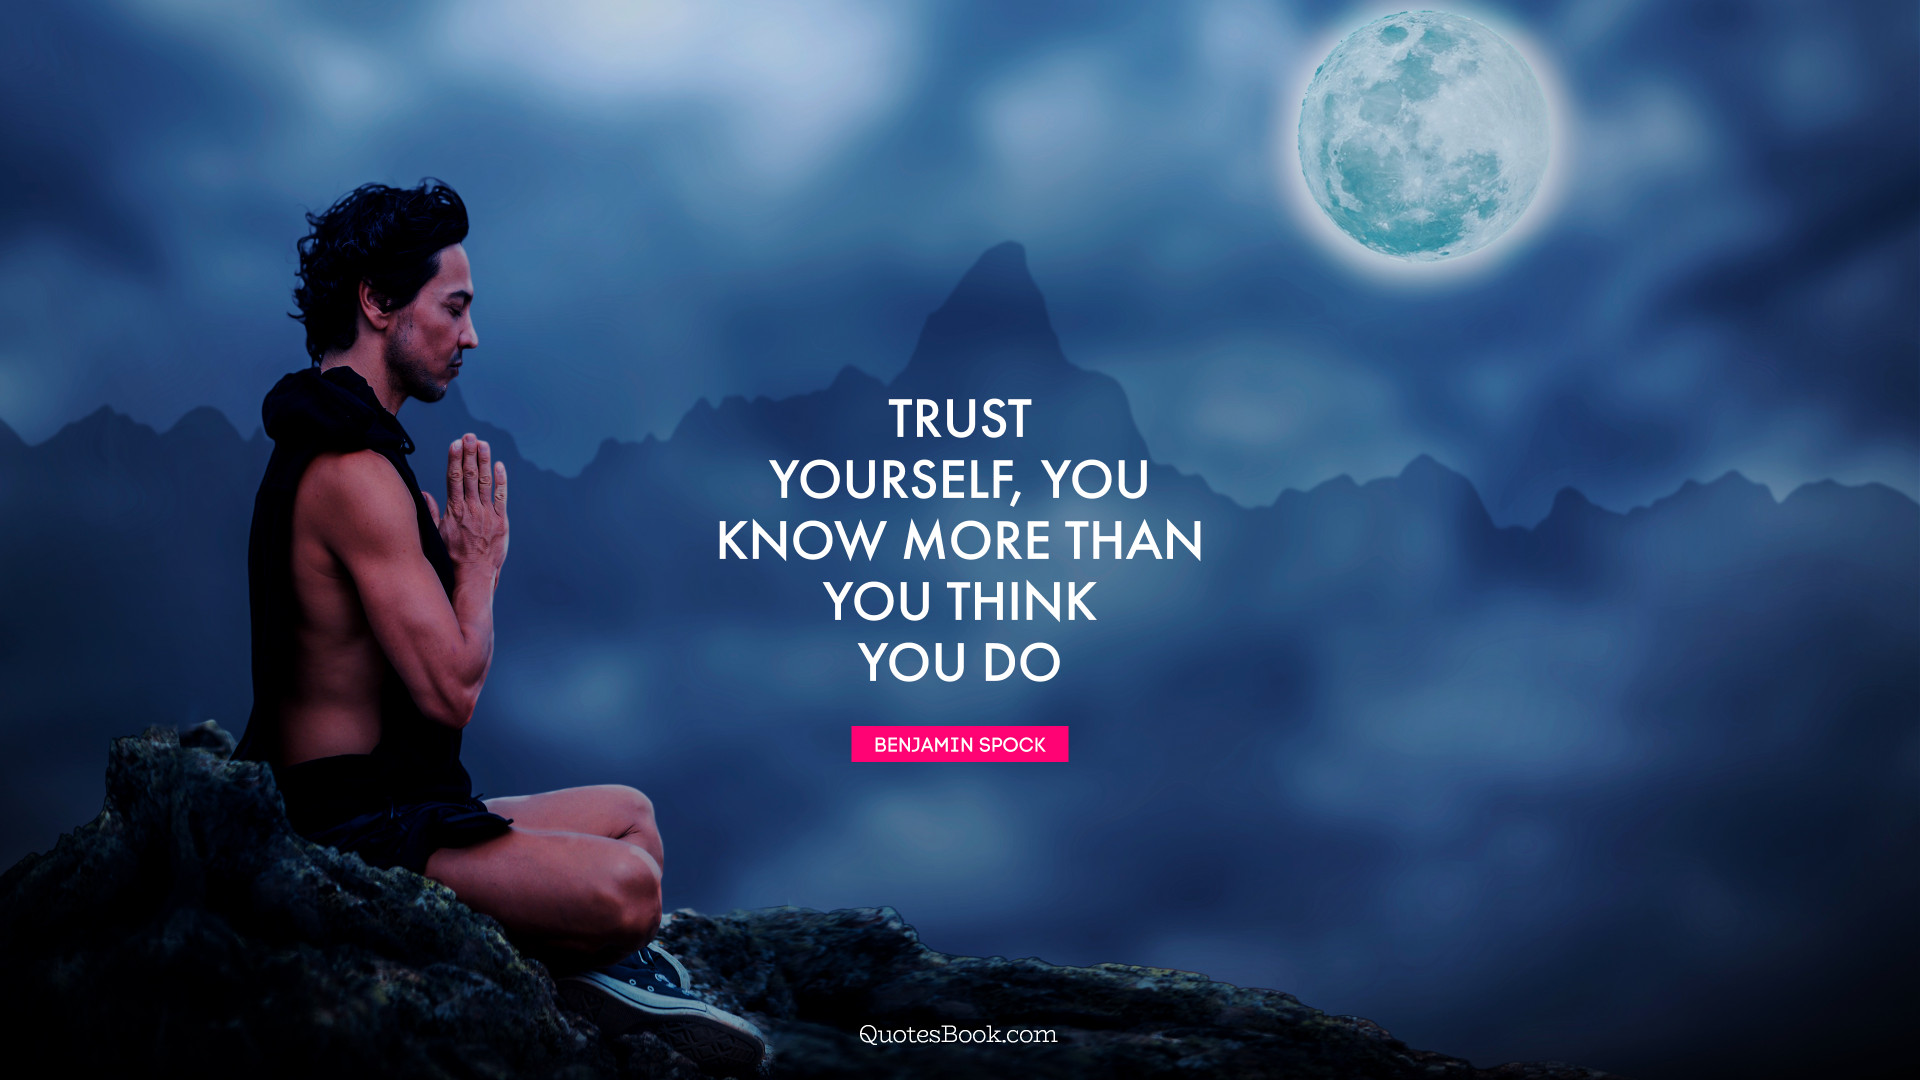 trust yourself you know more than you think you do 1920x1080 1037